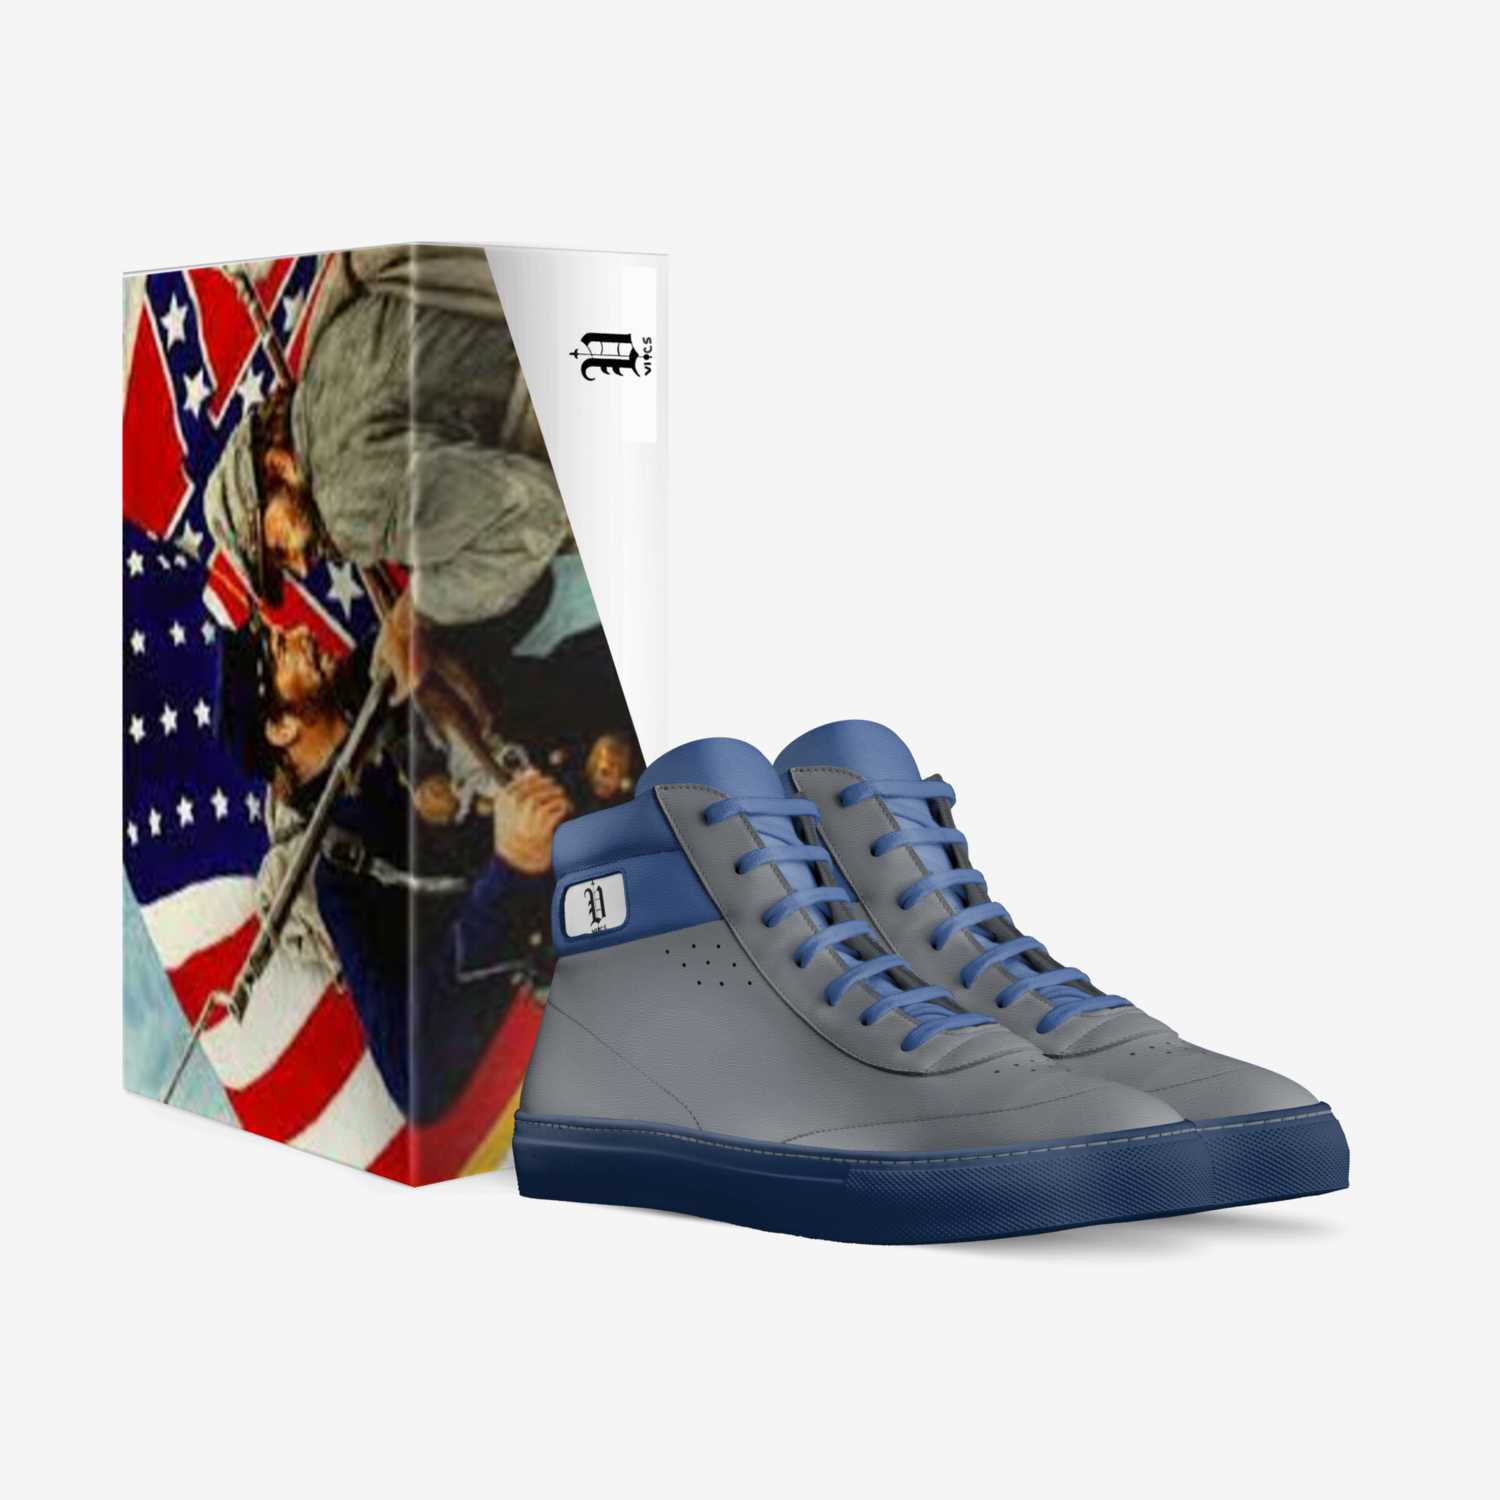 Vics civil war custom made in Italy shoes by Brayden Murphy | Box view